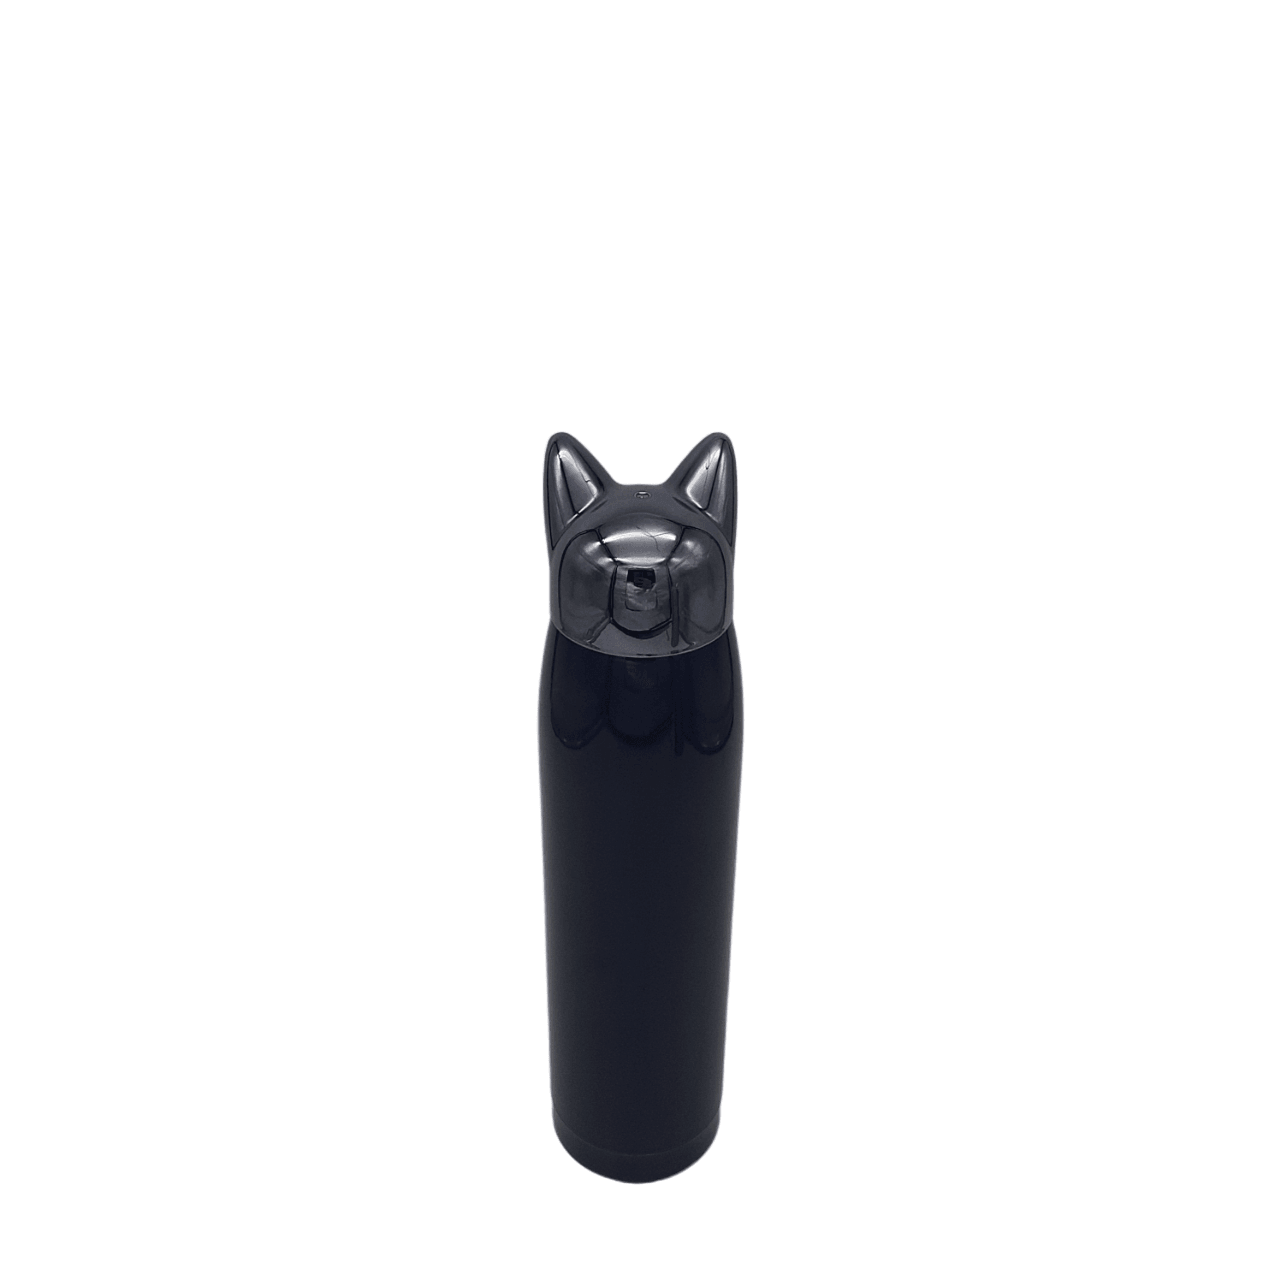 Fox Design Flask - Home And Trends